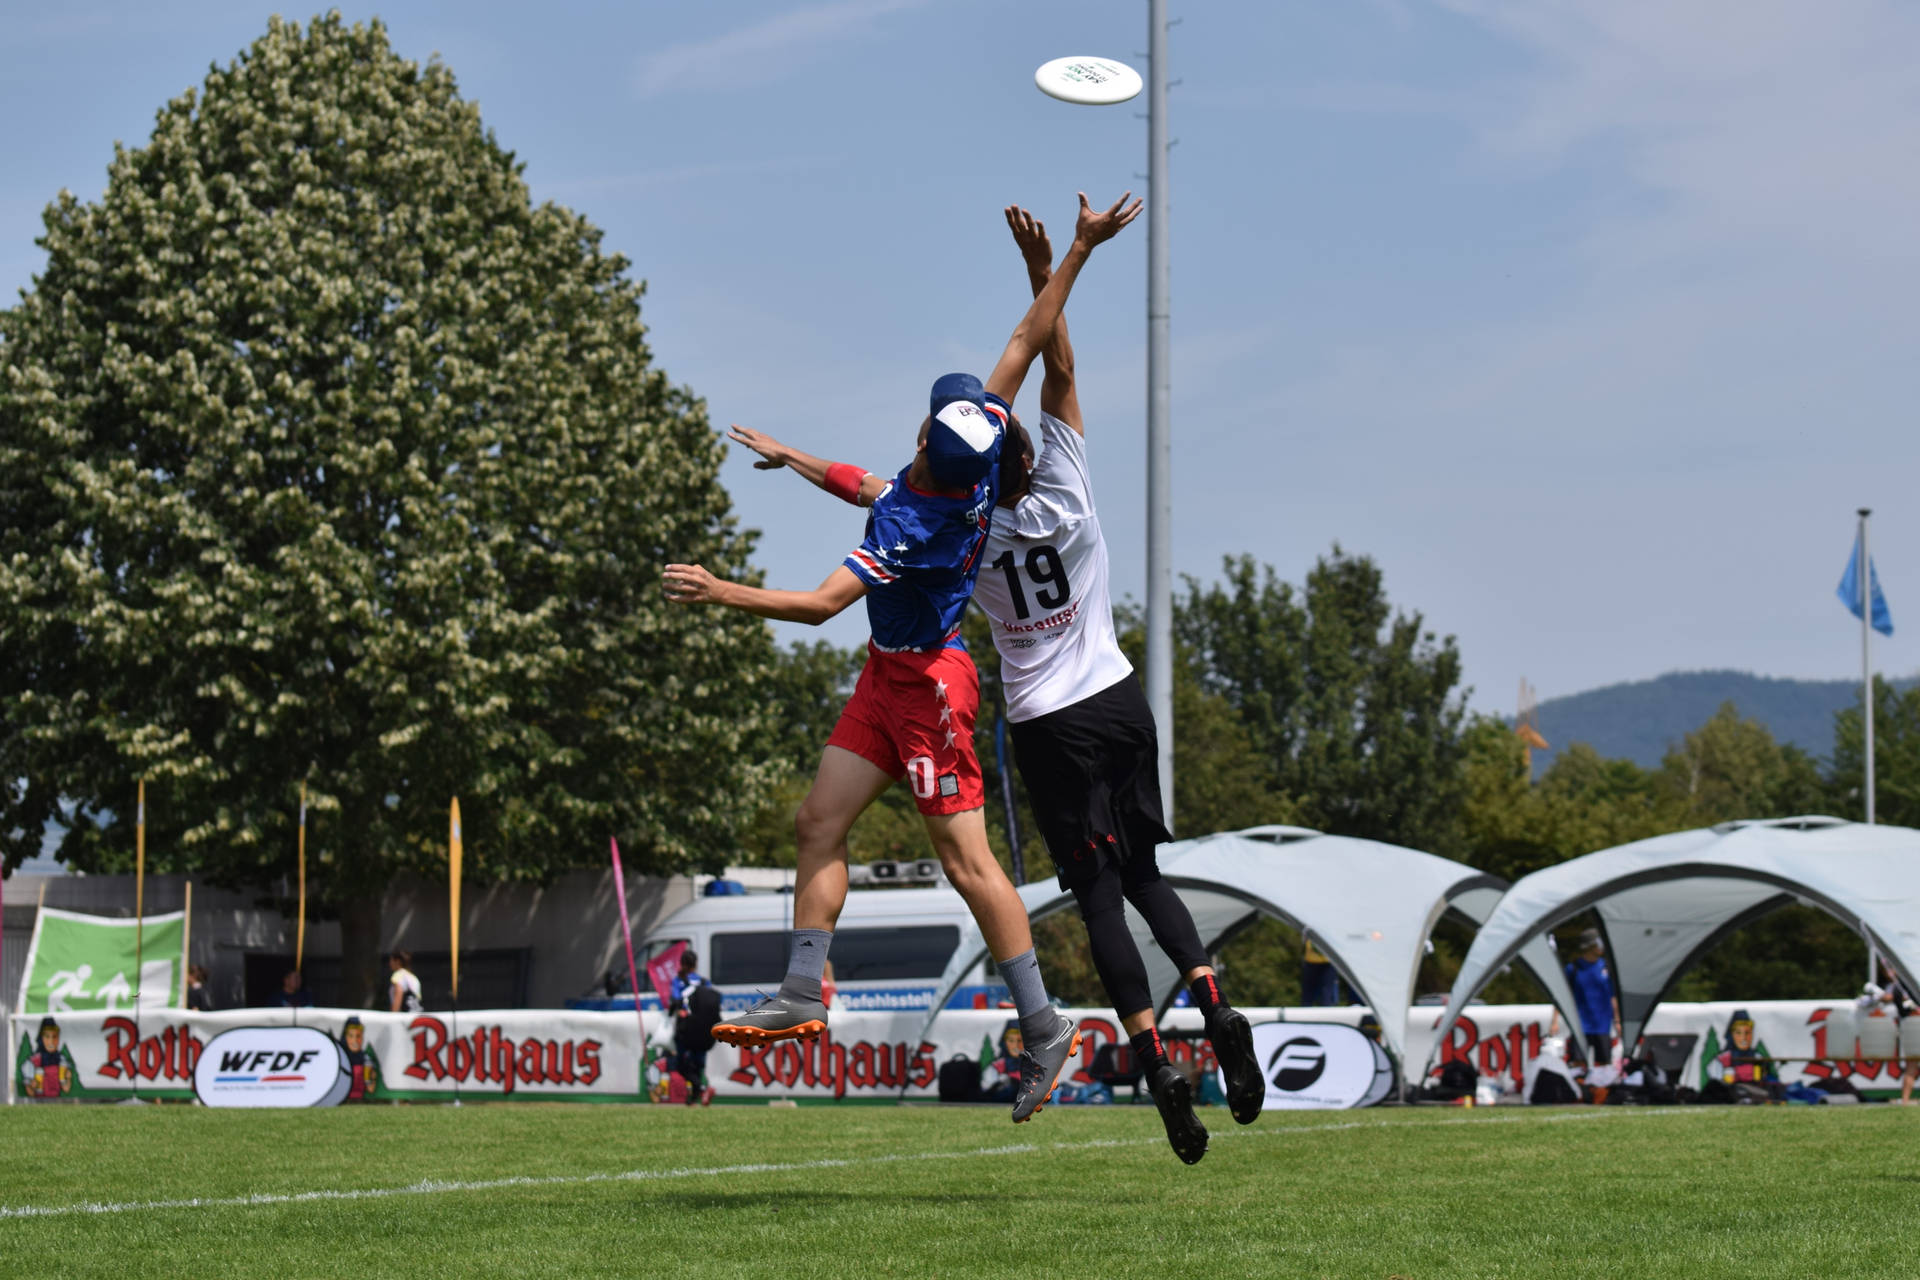 Ultimate Frisbee 5238X3492 Wallpaper and Background Image